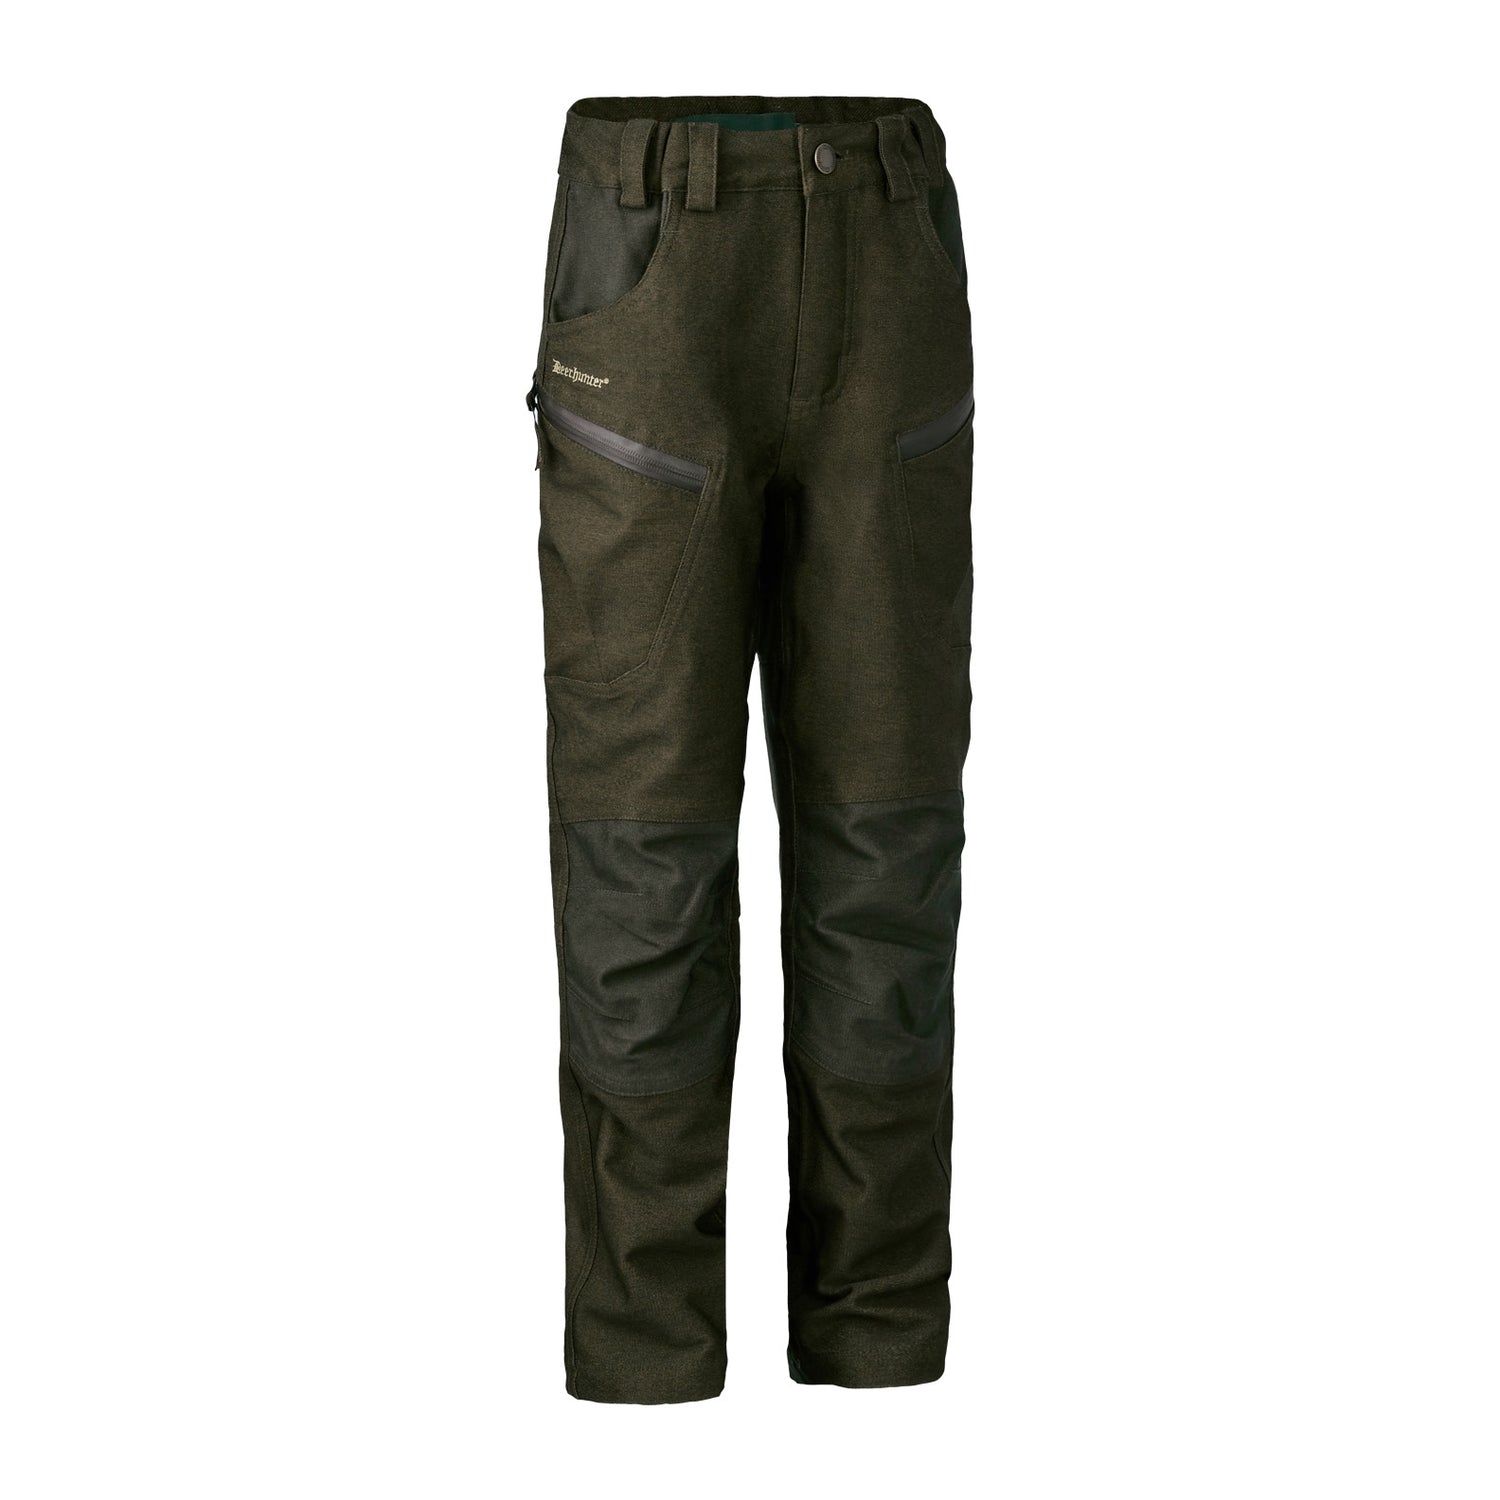 Deerhunter-Childrens-Chasse-Trousers